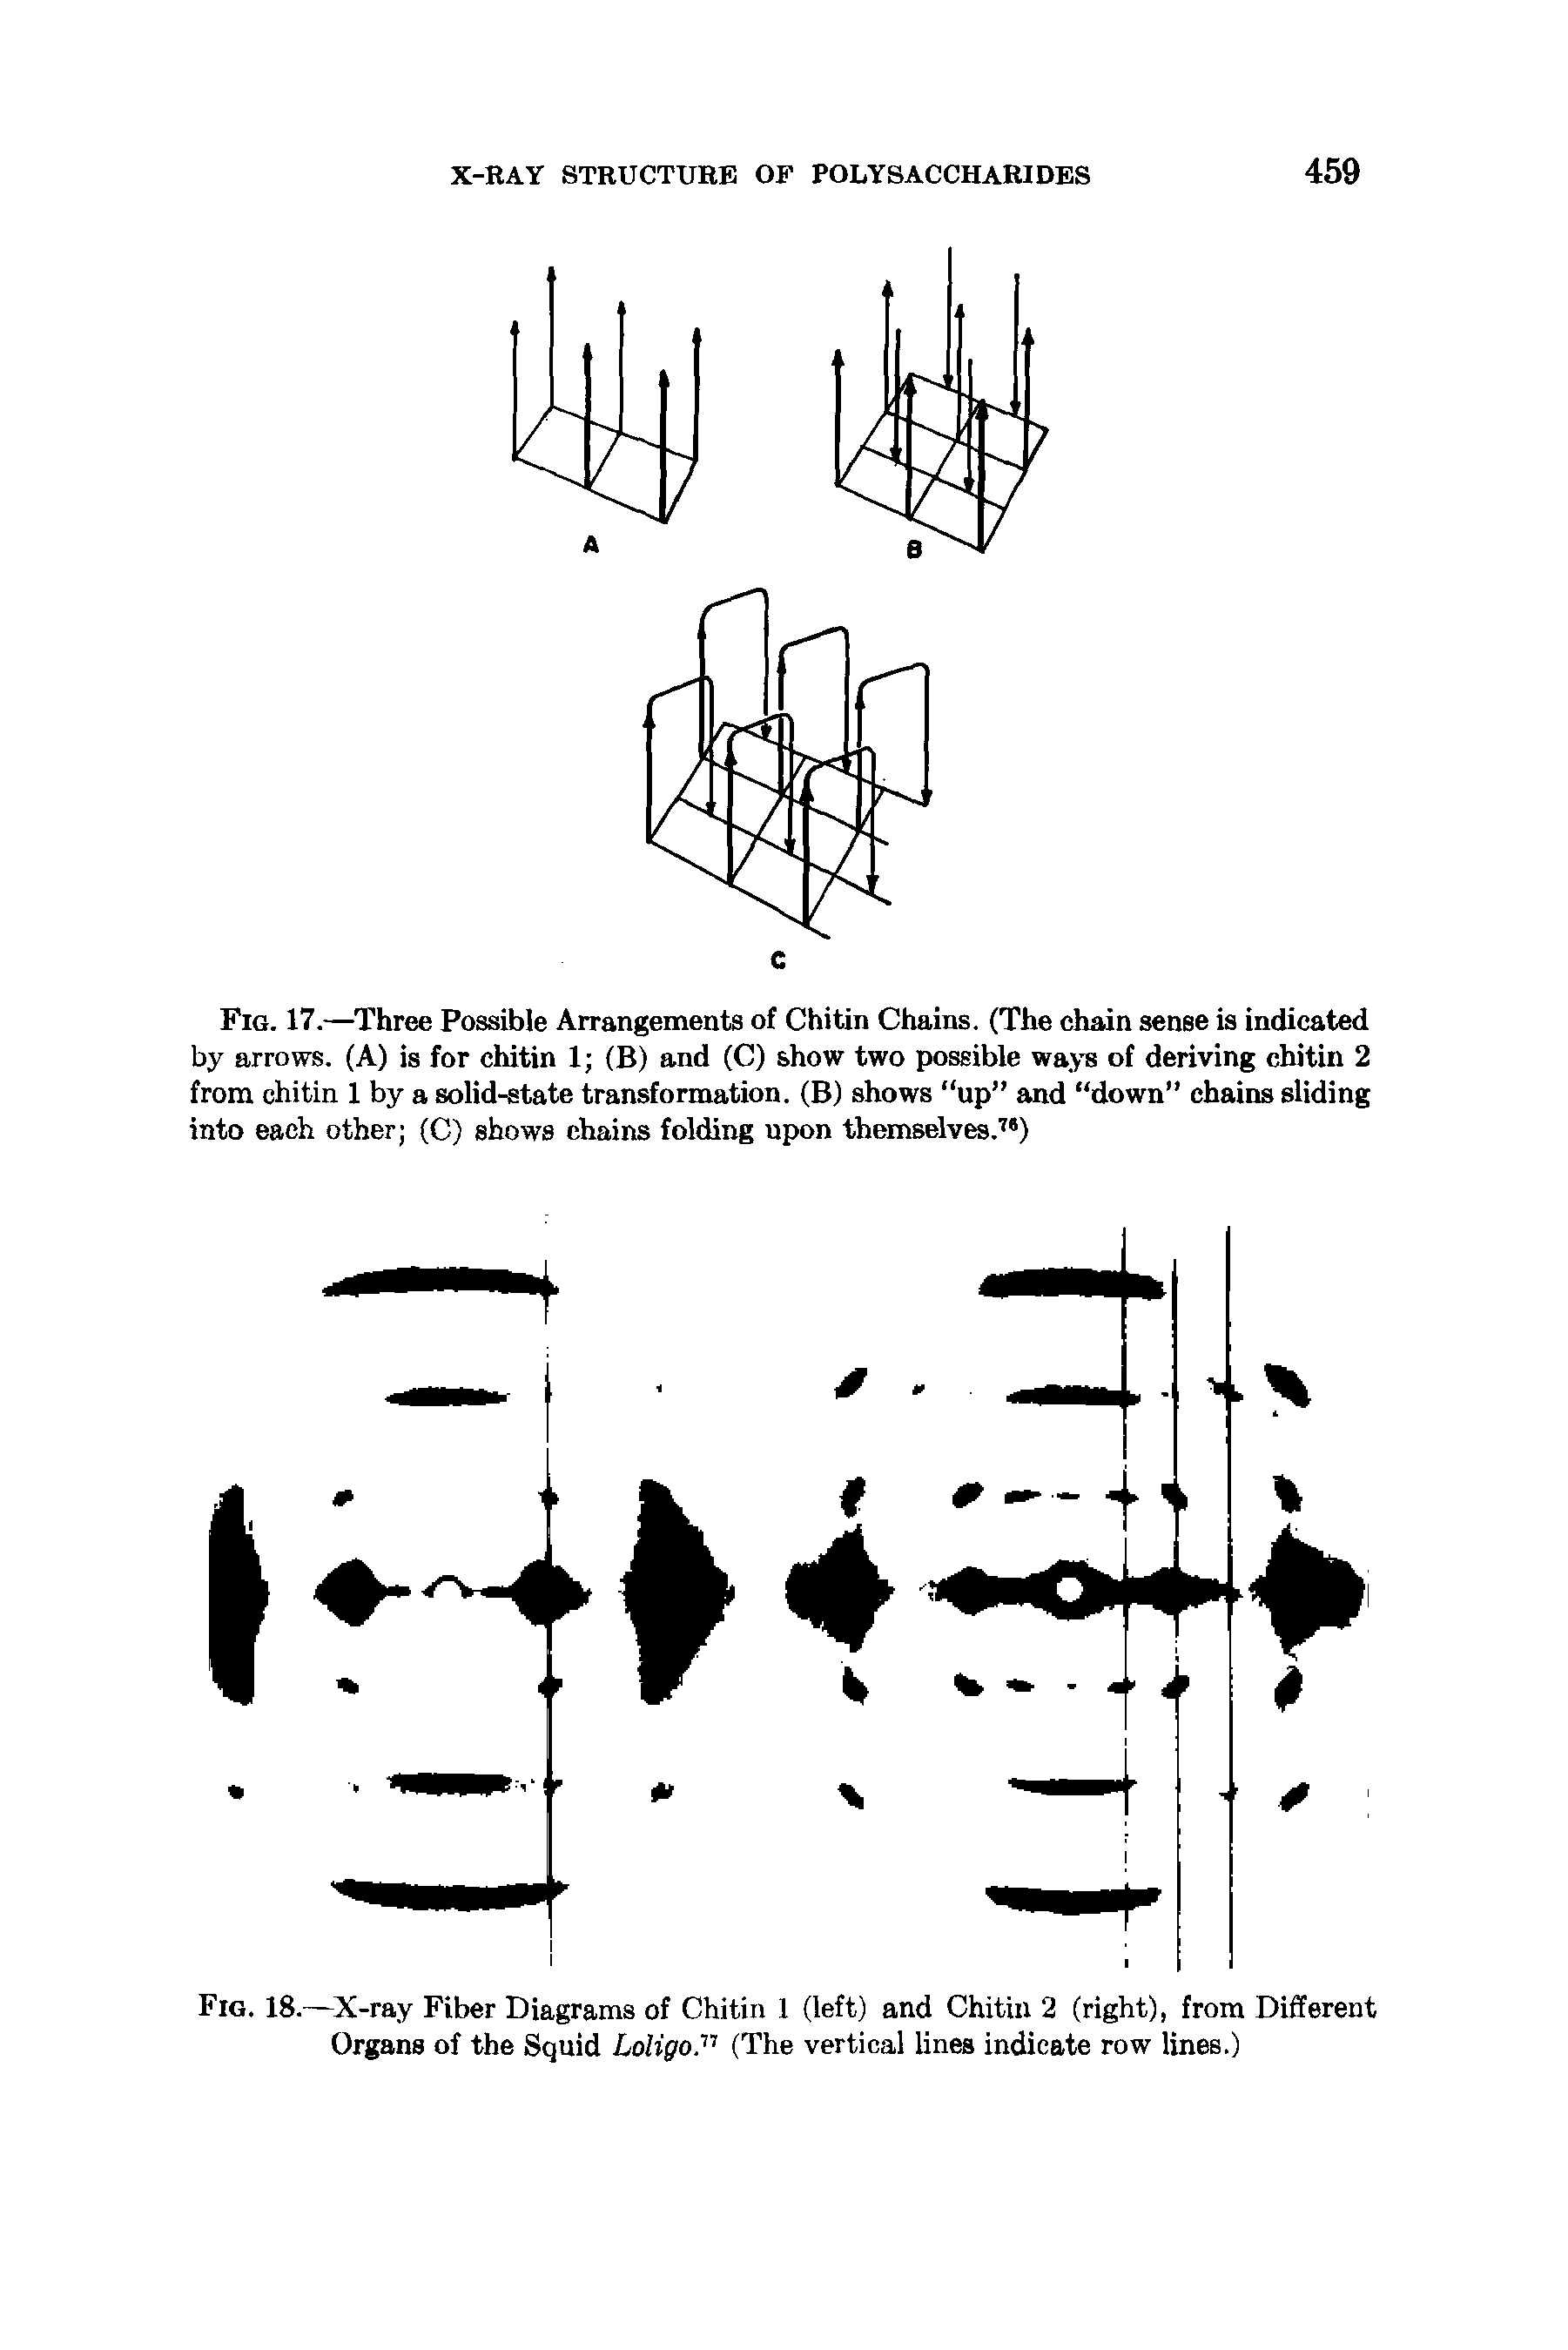 Fig. 17.—Three Possible Arrangements of Chitin Chains. (The chain sense is indicated by arrows. (A) is for chitin 1 (B) and (C) show two possible ways of deriving chitin 2 from chitin 1 by a solid-state transformation. (B) shows up and down chains sliding into each other (C) shows chains folding upon themselves. ")...